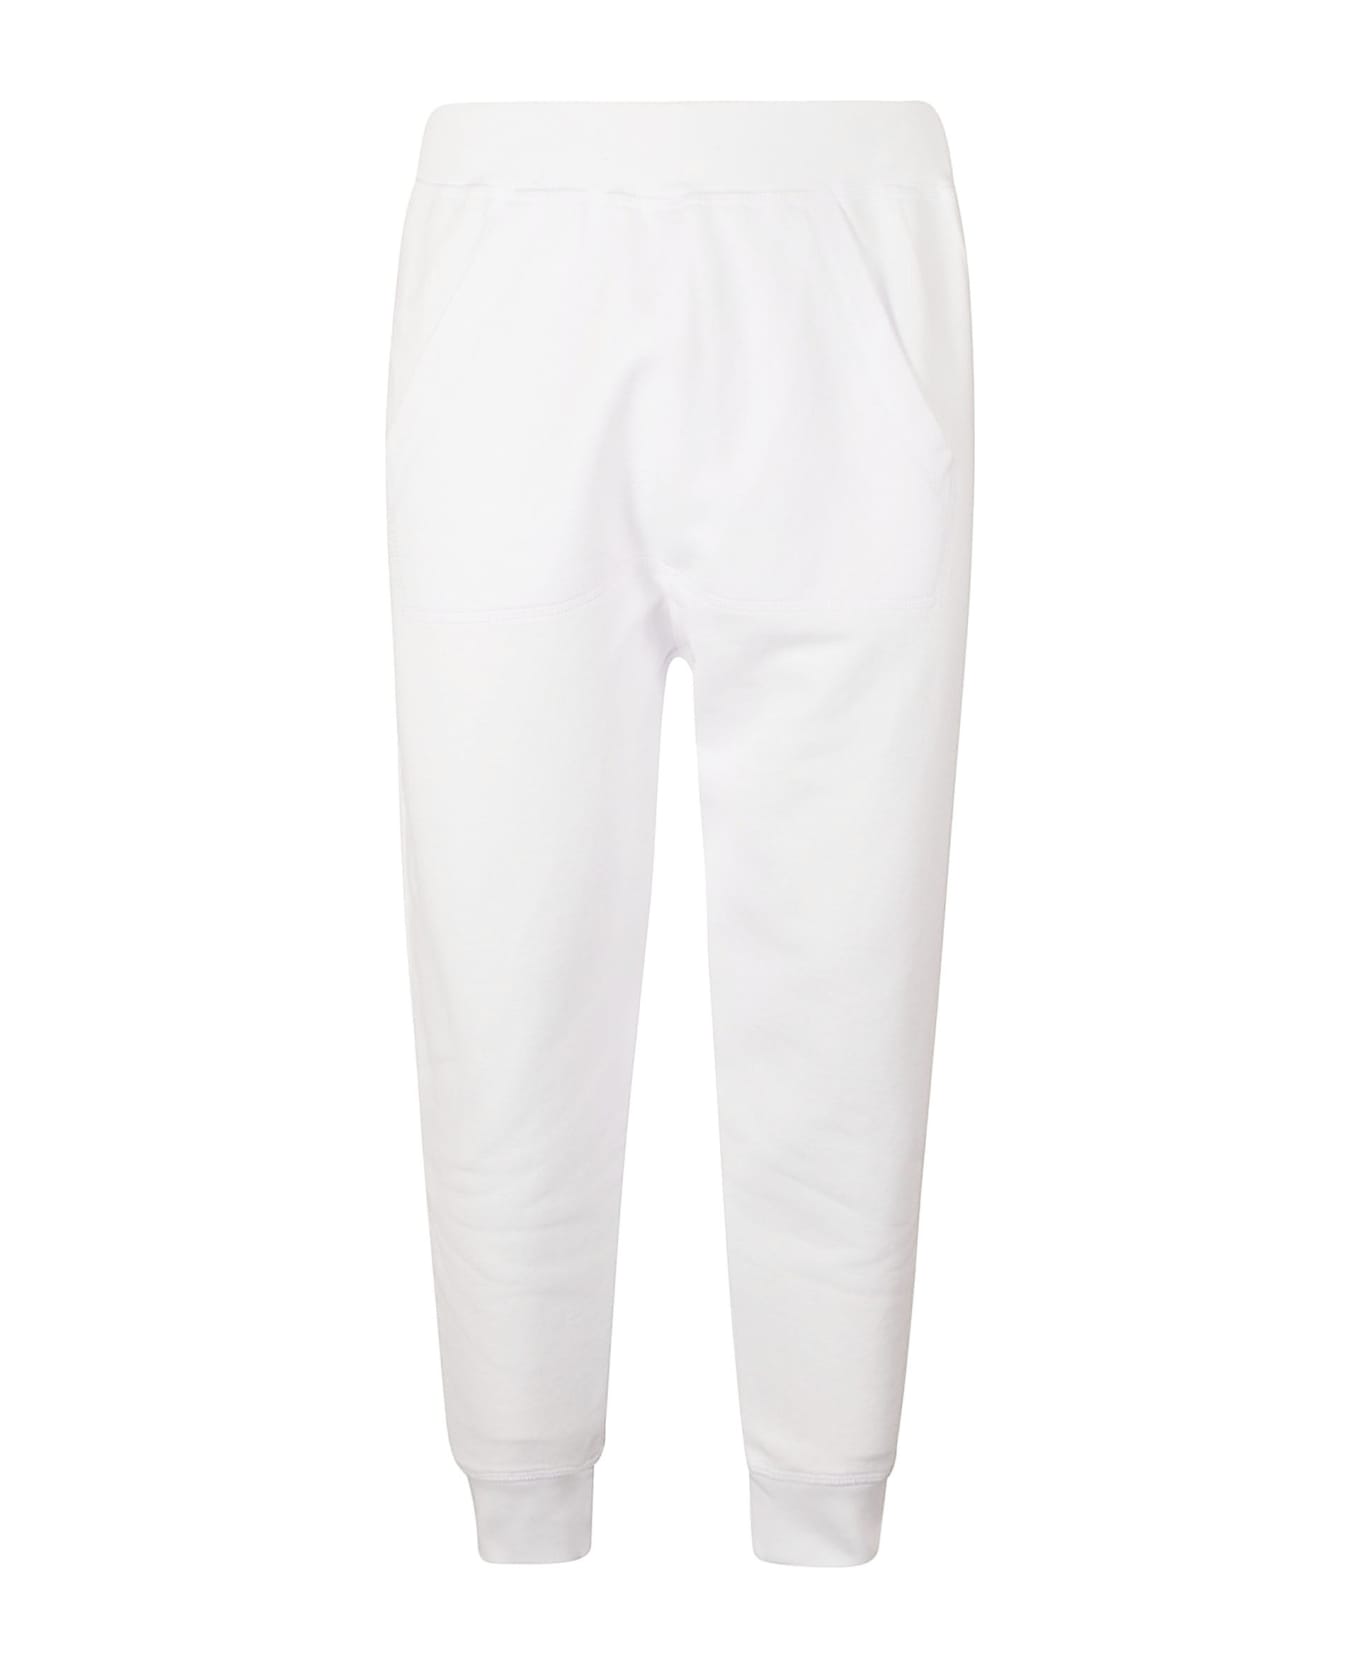 Dsquared2 Relax Dan Trousers - White